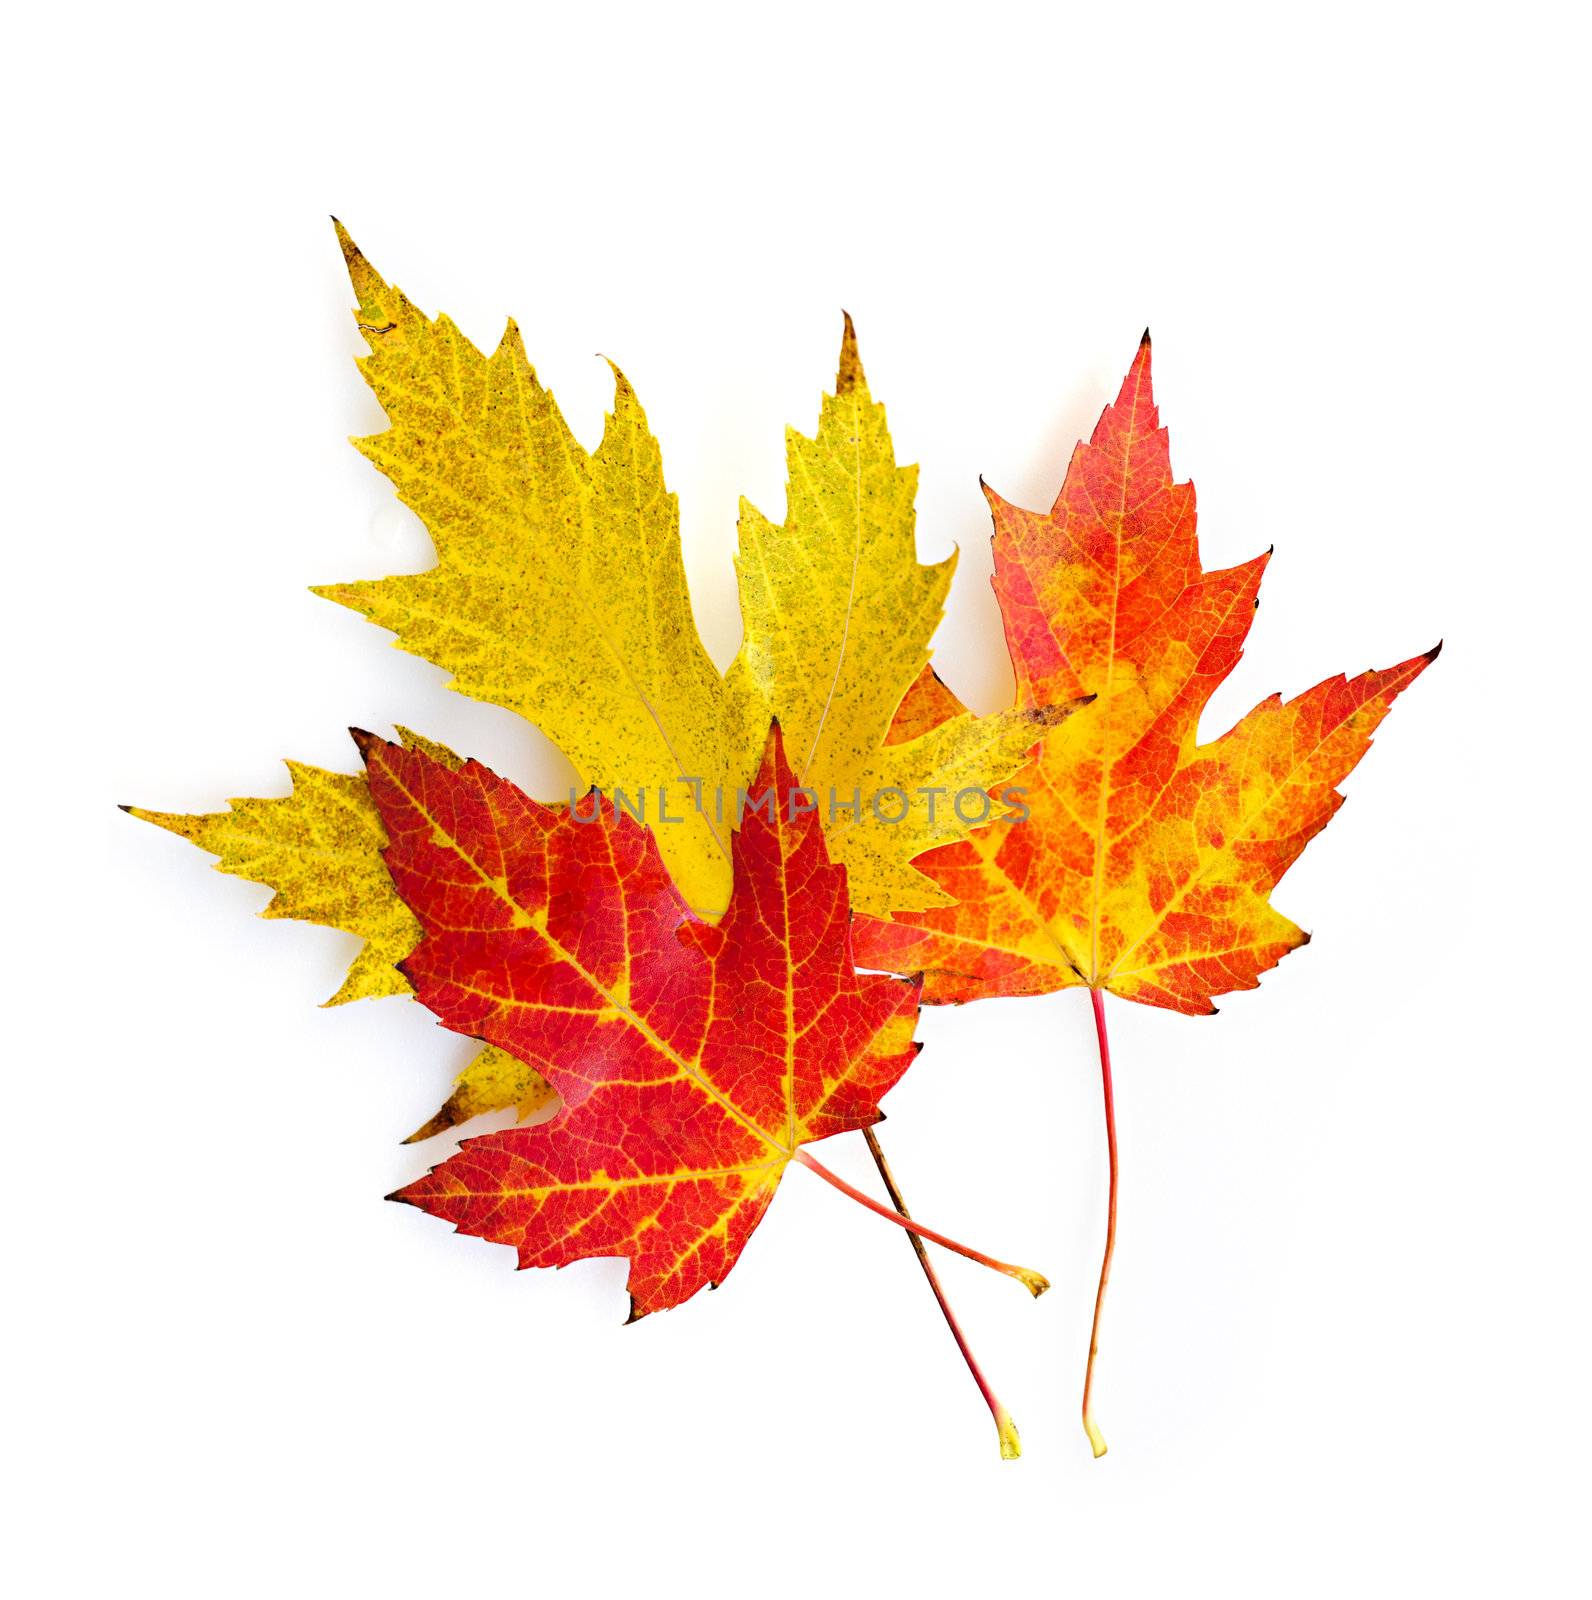 Three colorful fall maple leaves isolated on white background